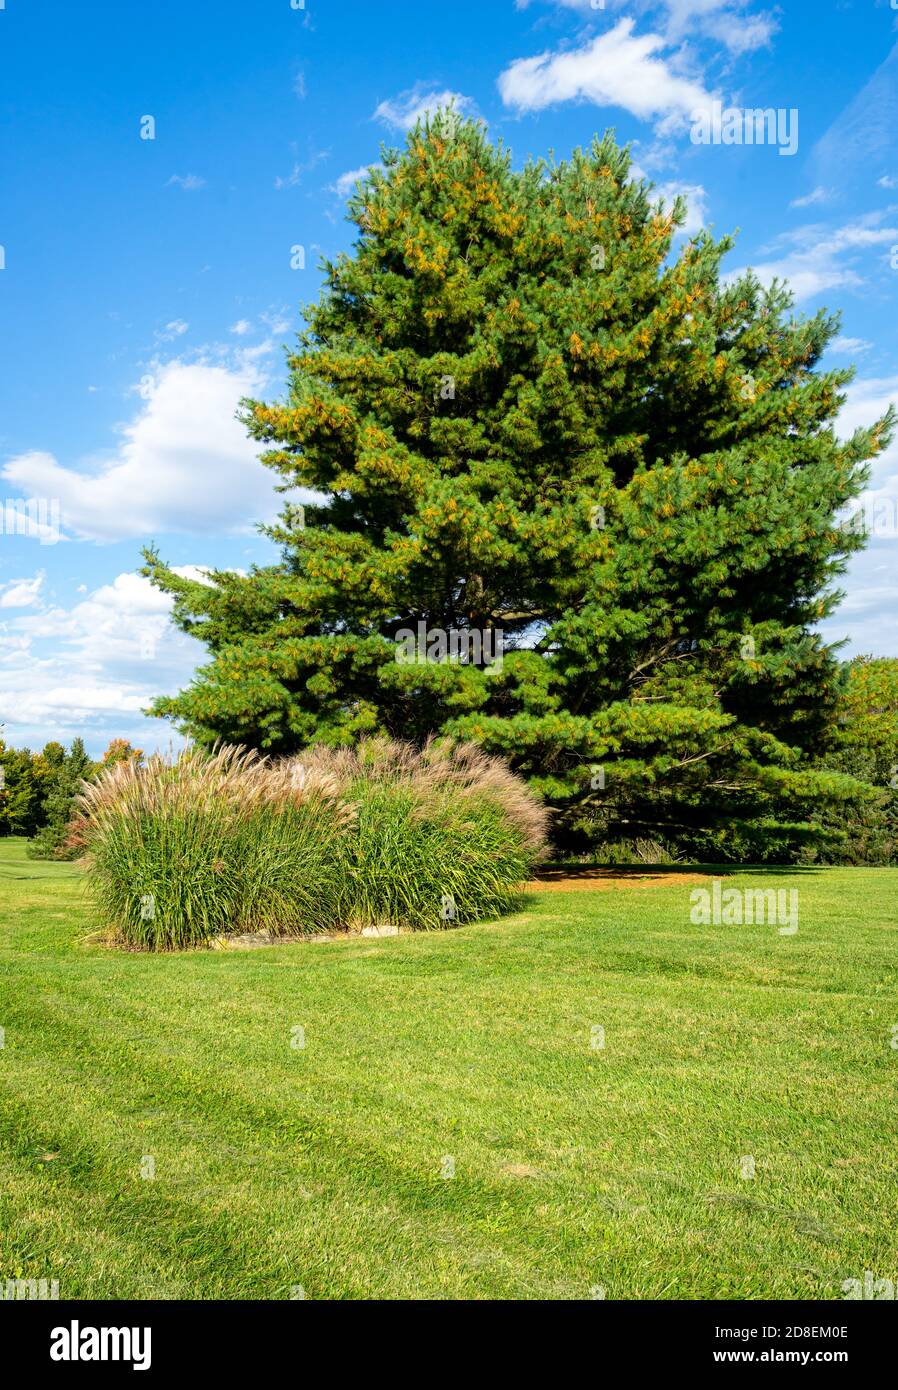 Beautiful park with evergreen tree and grass Stock Photo